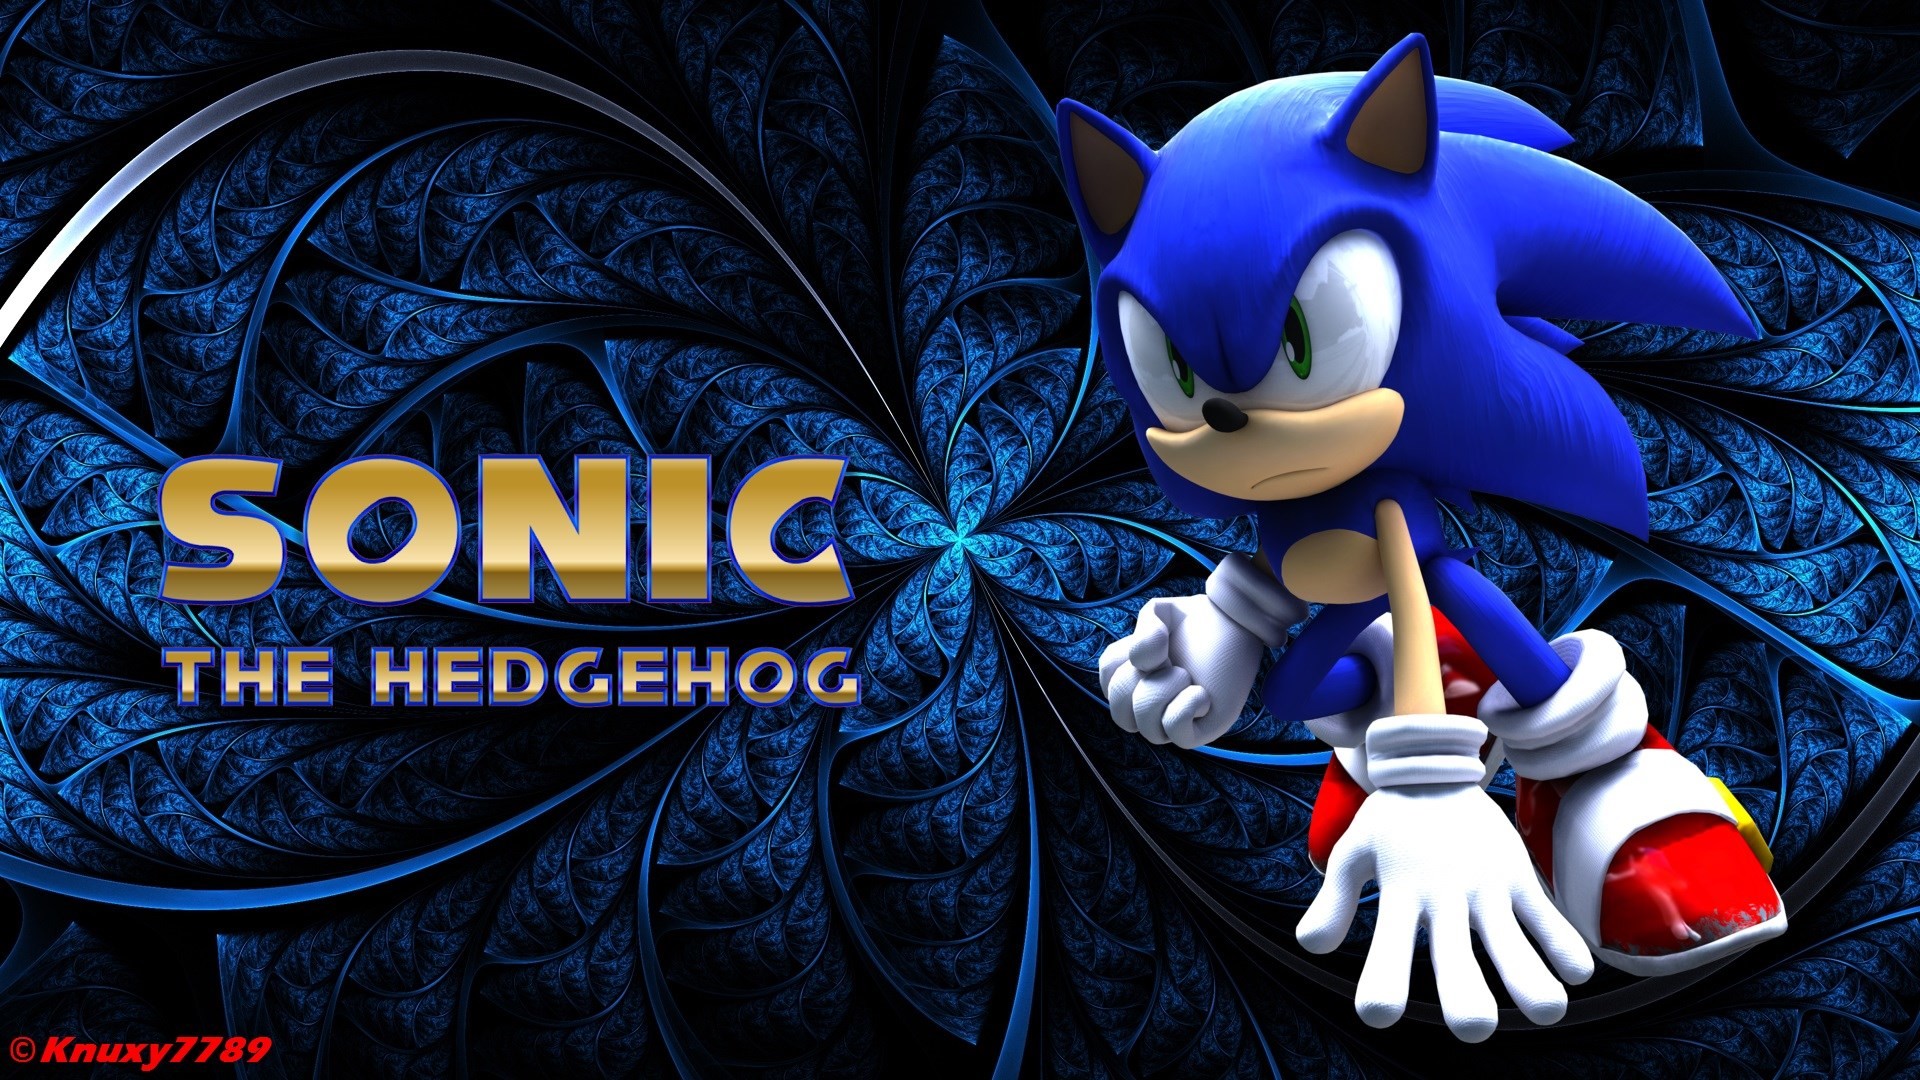 Sonic the hedgehog wallpaper by knuxy7789